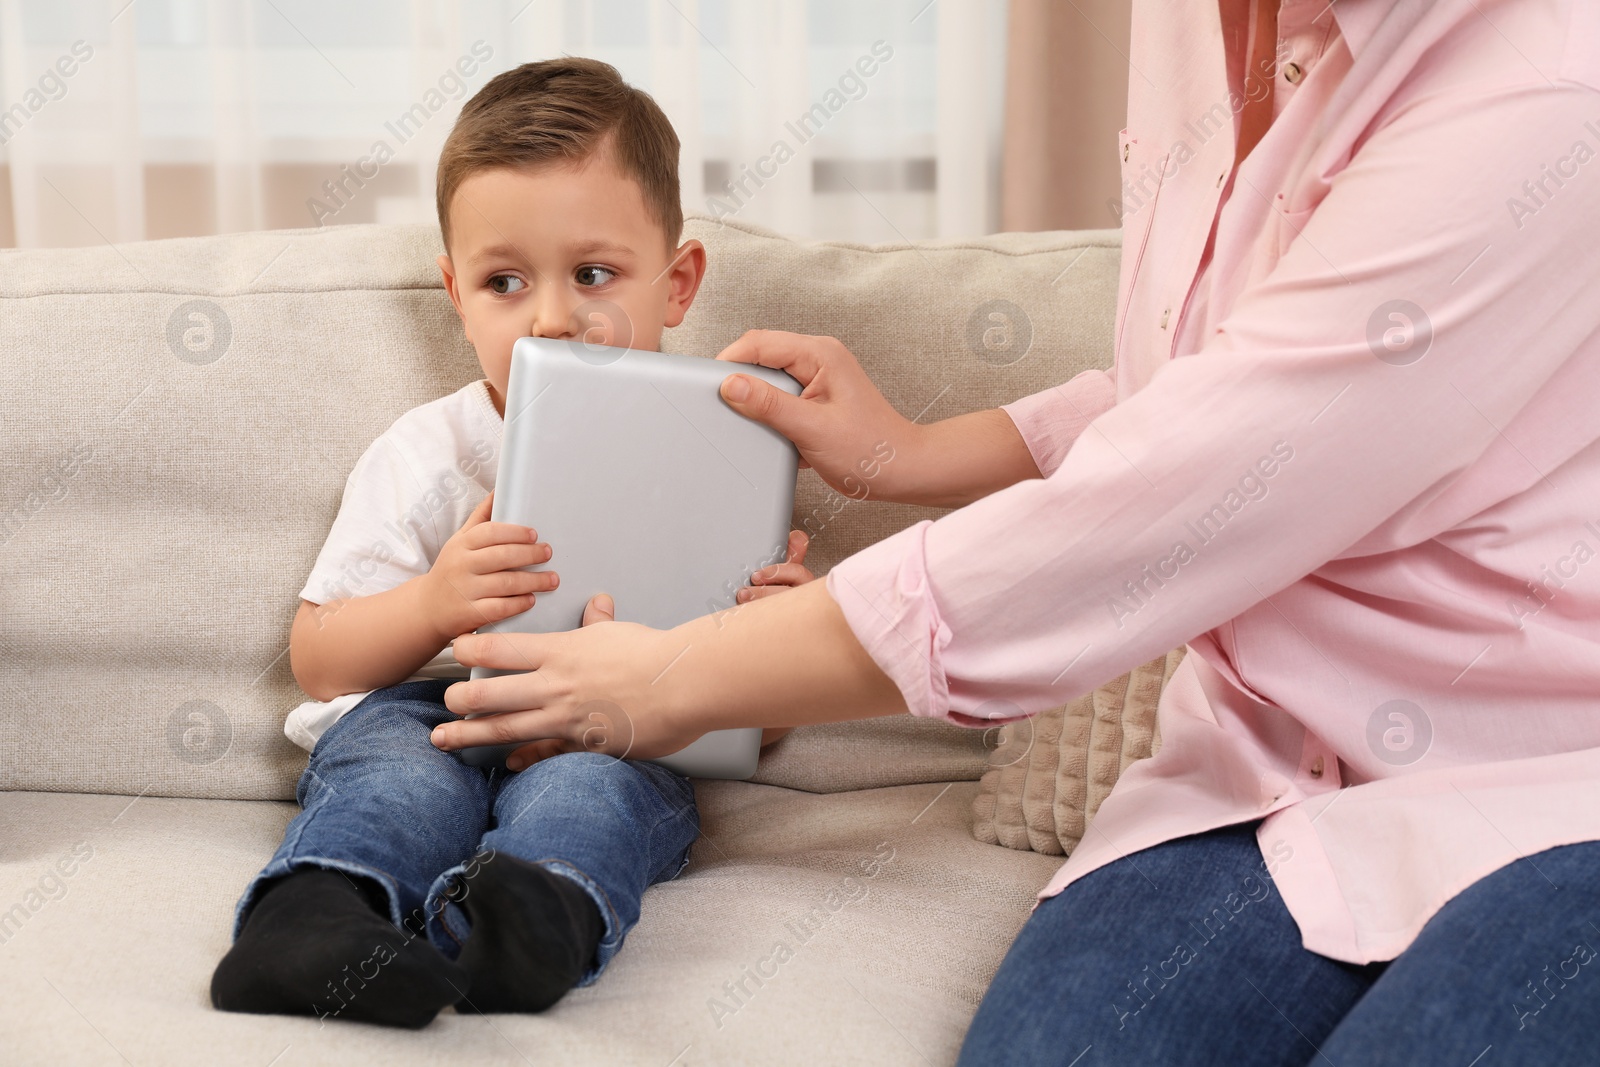 Photo of Internet addiction. Mother taking away tablet from her little son on sofa at home, closeup